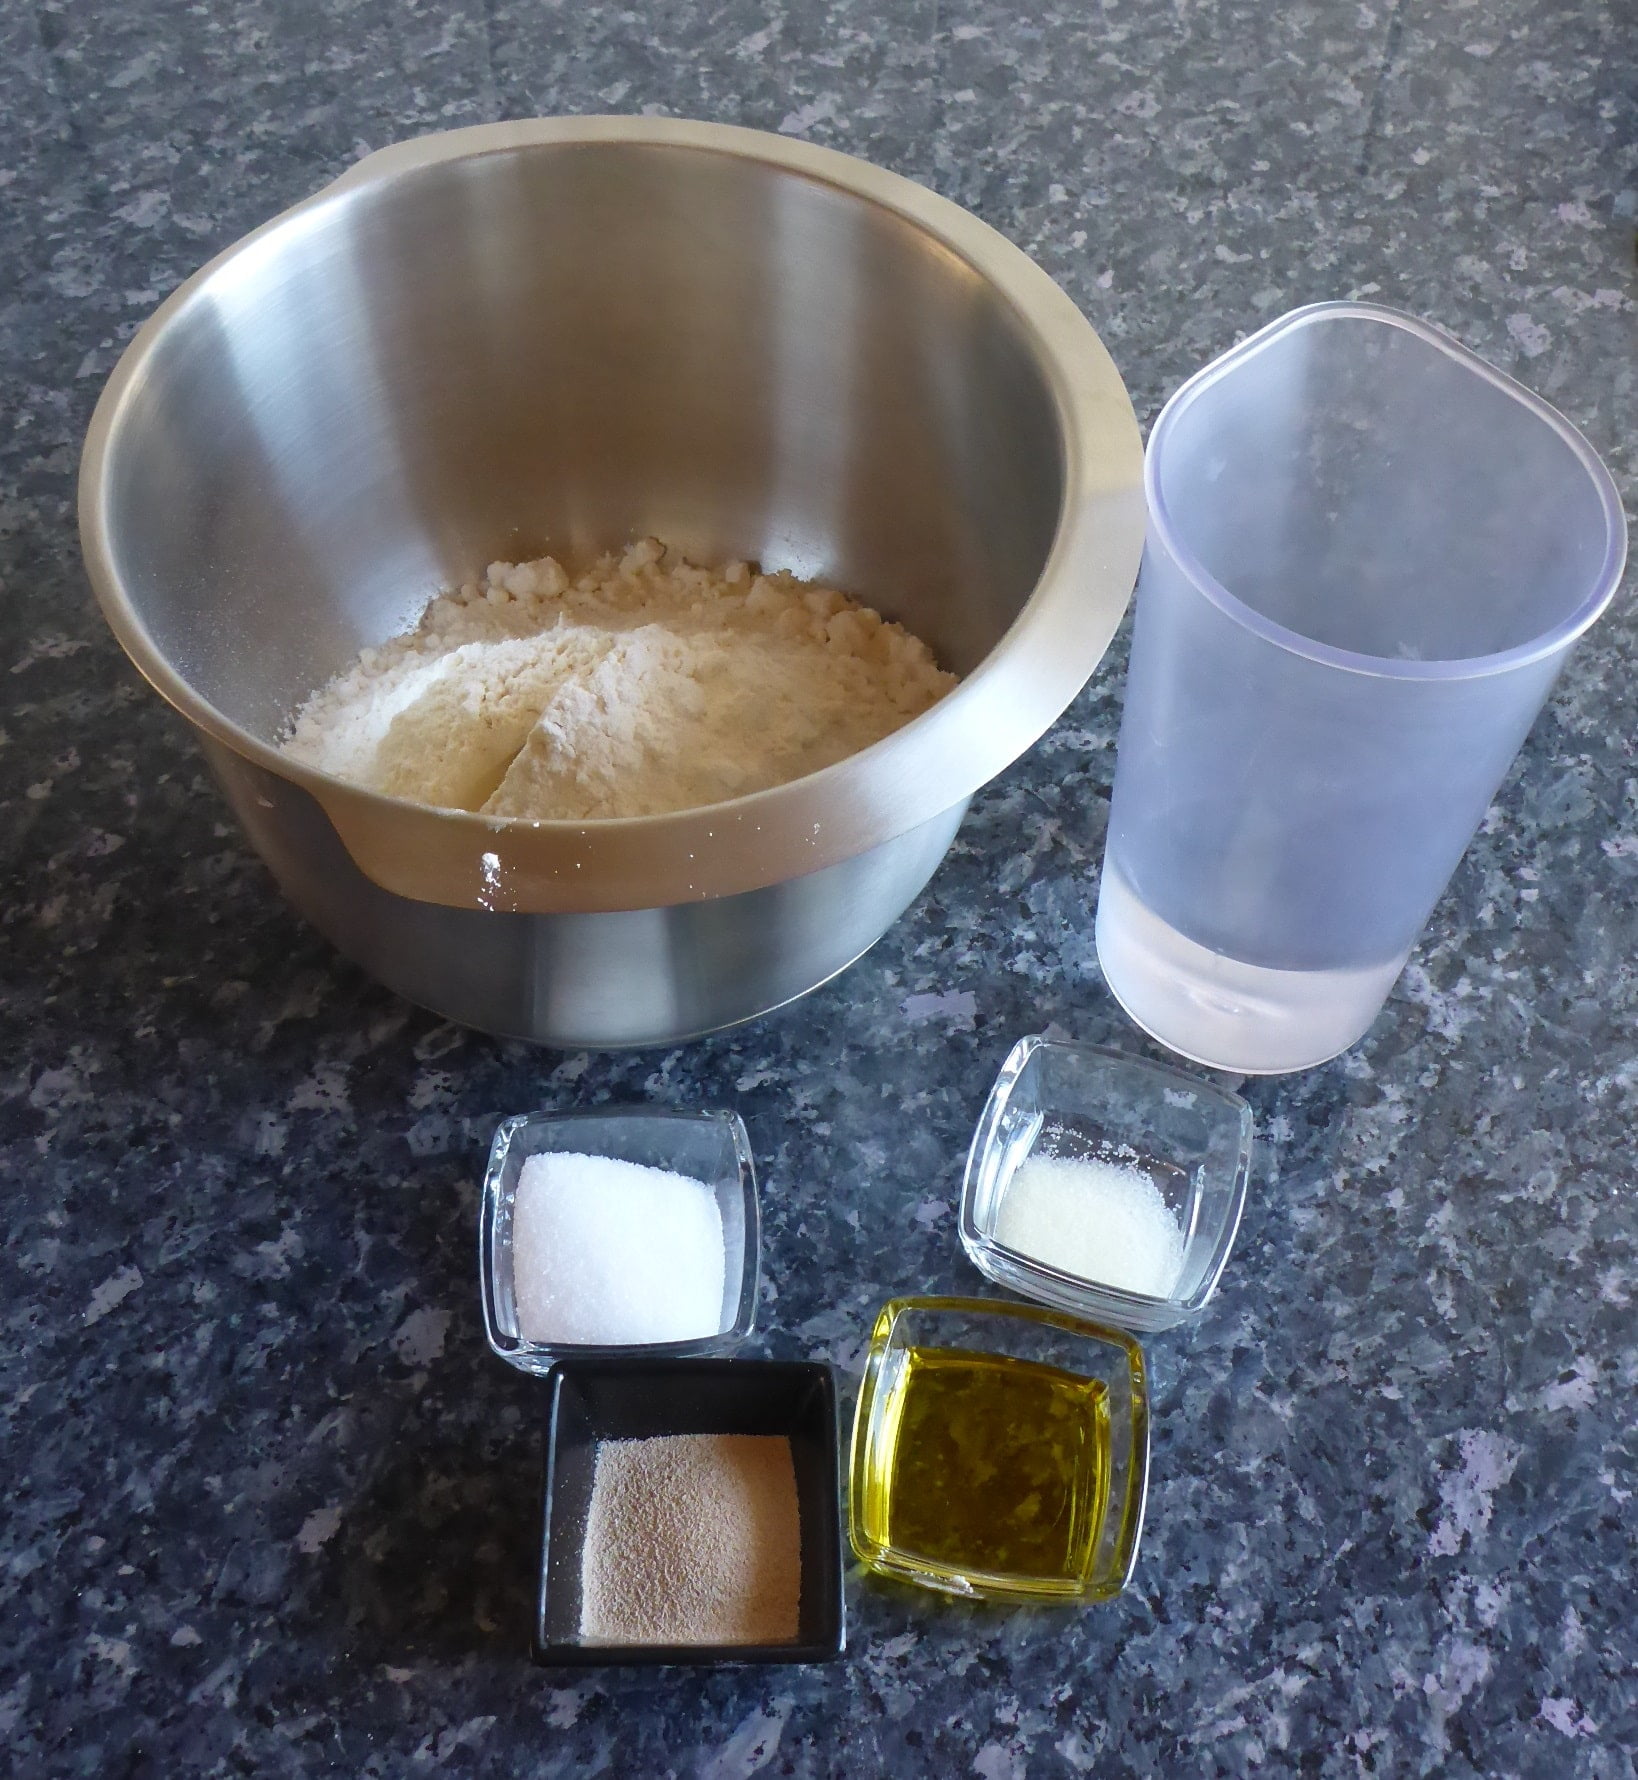 Ingredients for Yeast Dough: Flour, Yeast, Water, Sugar, Salt, and and olive oil.